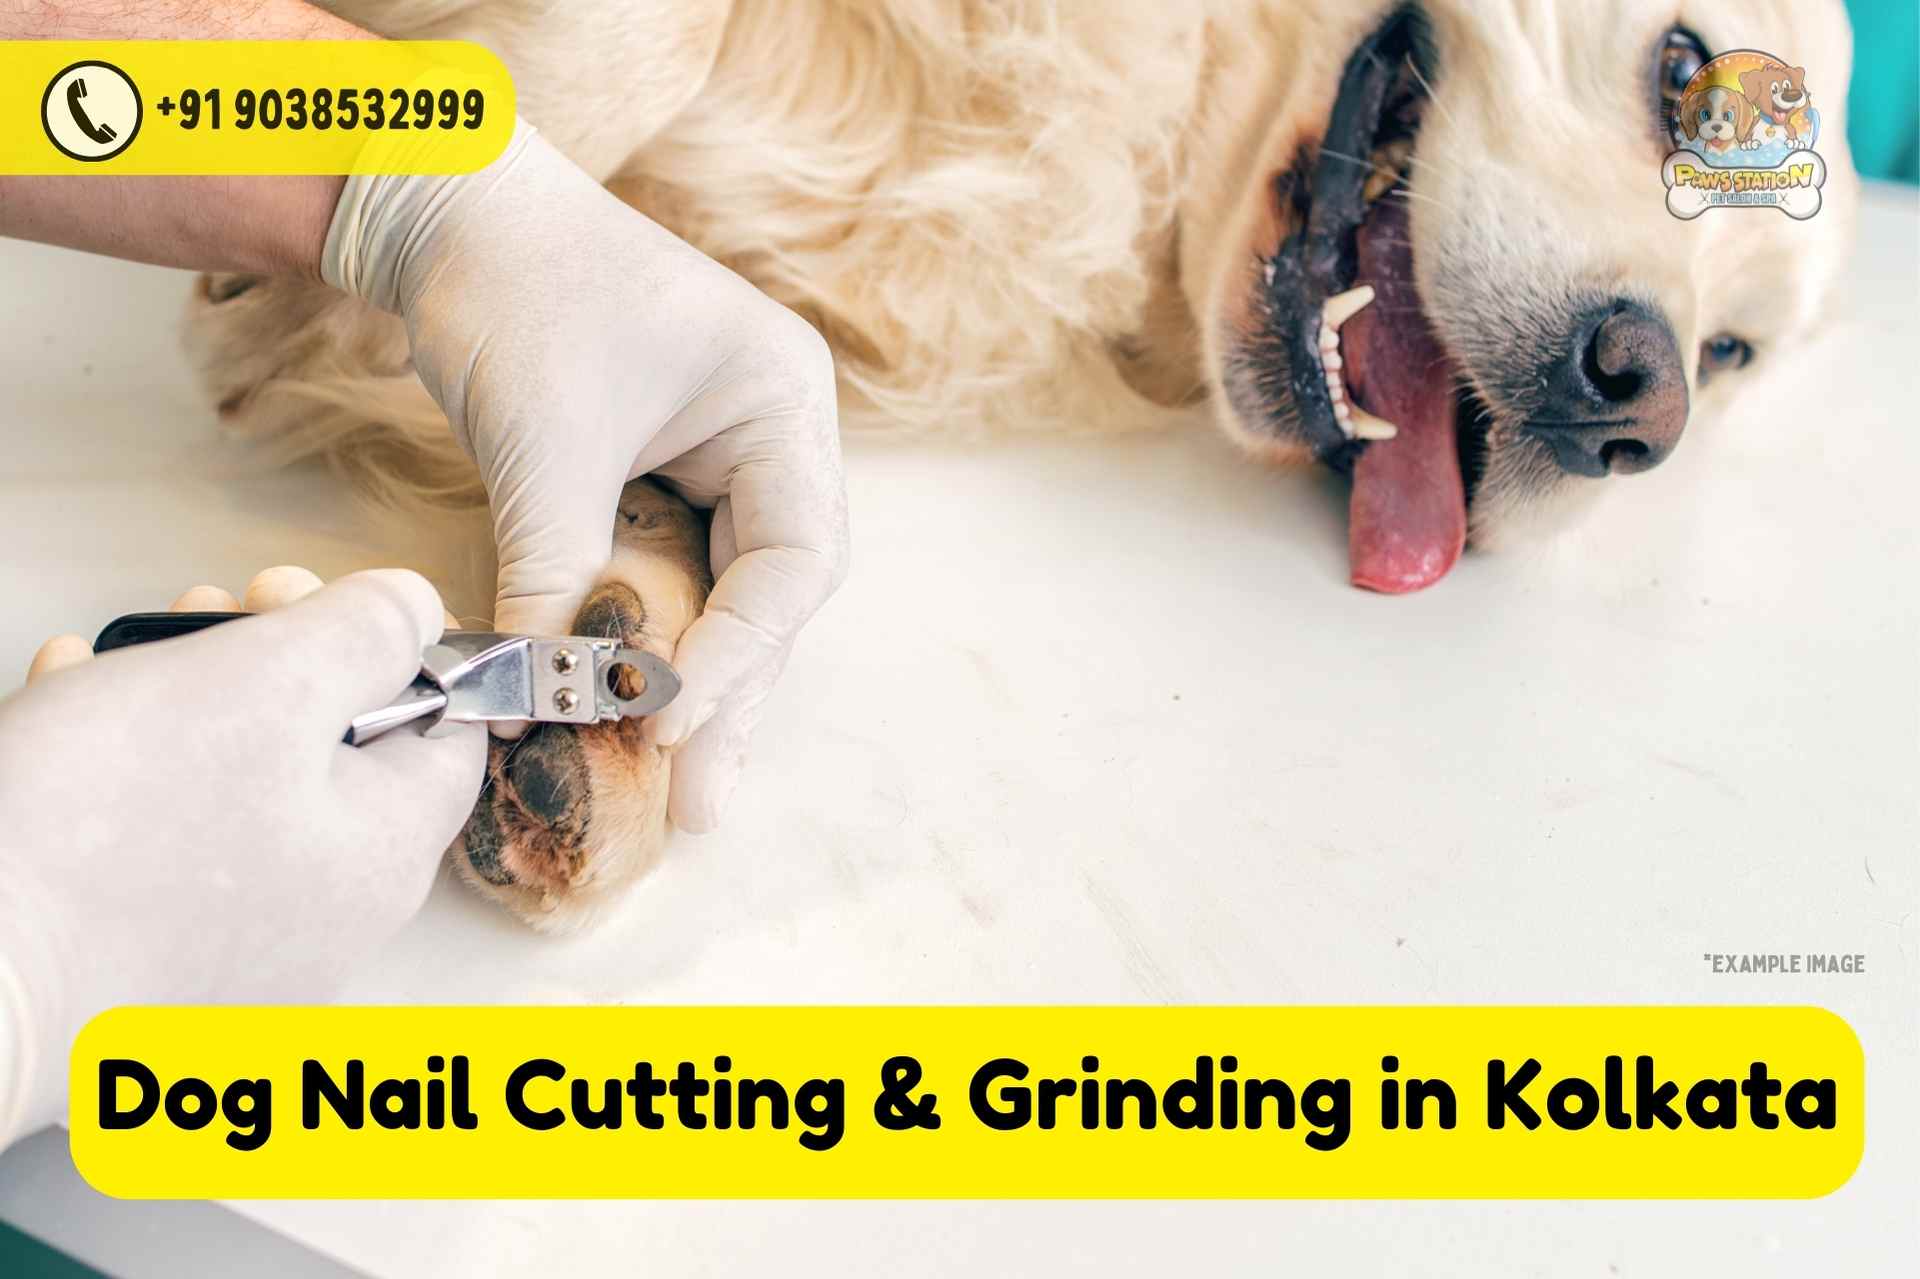 How to Get A Dog to Tolerate Nail Trims - 5 Tips - ThatMutt.com